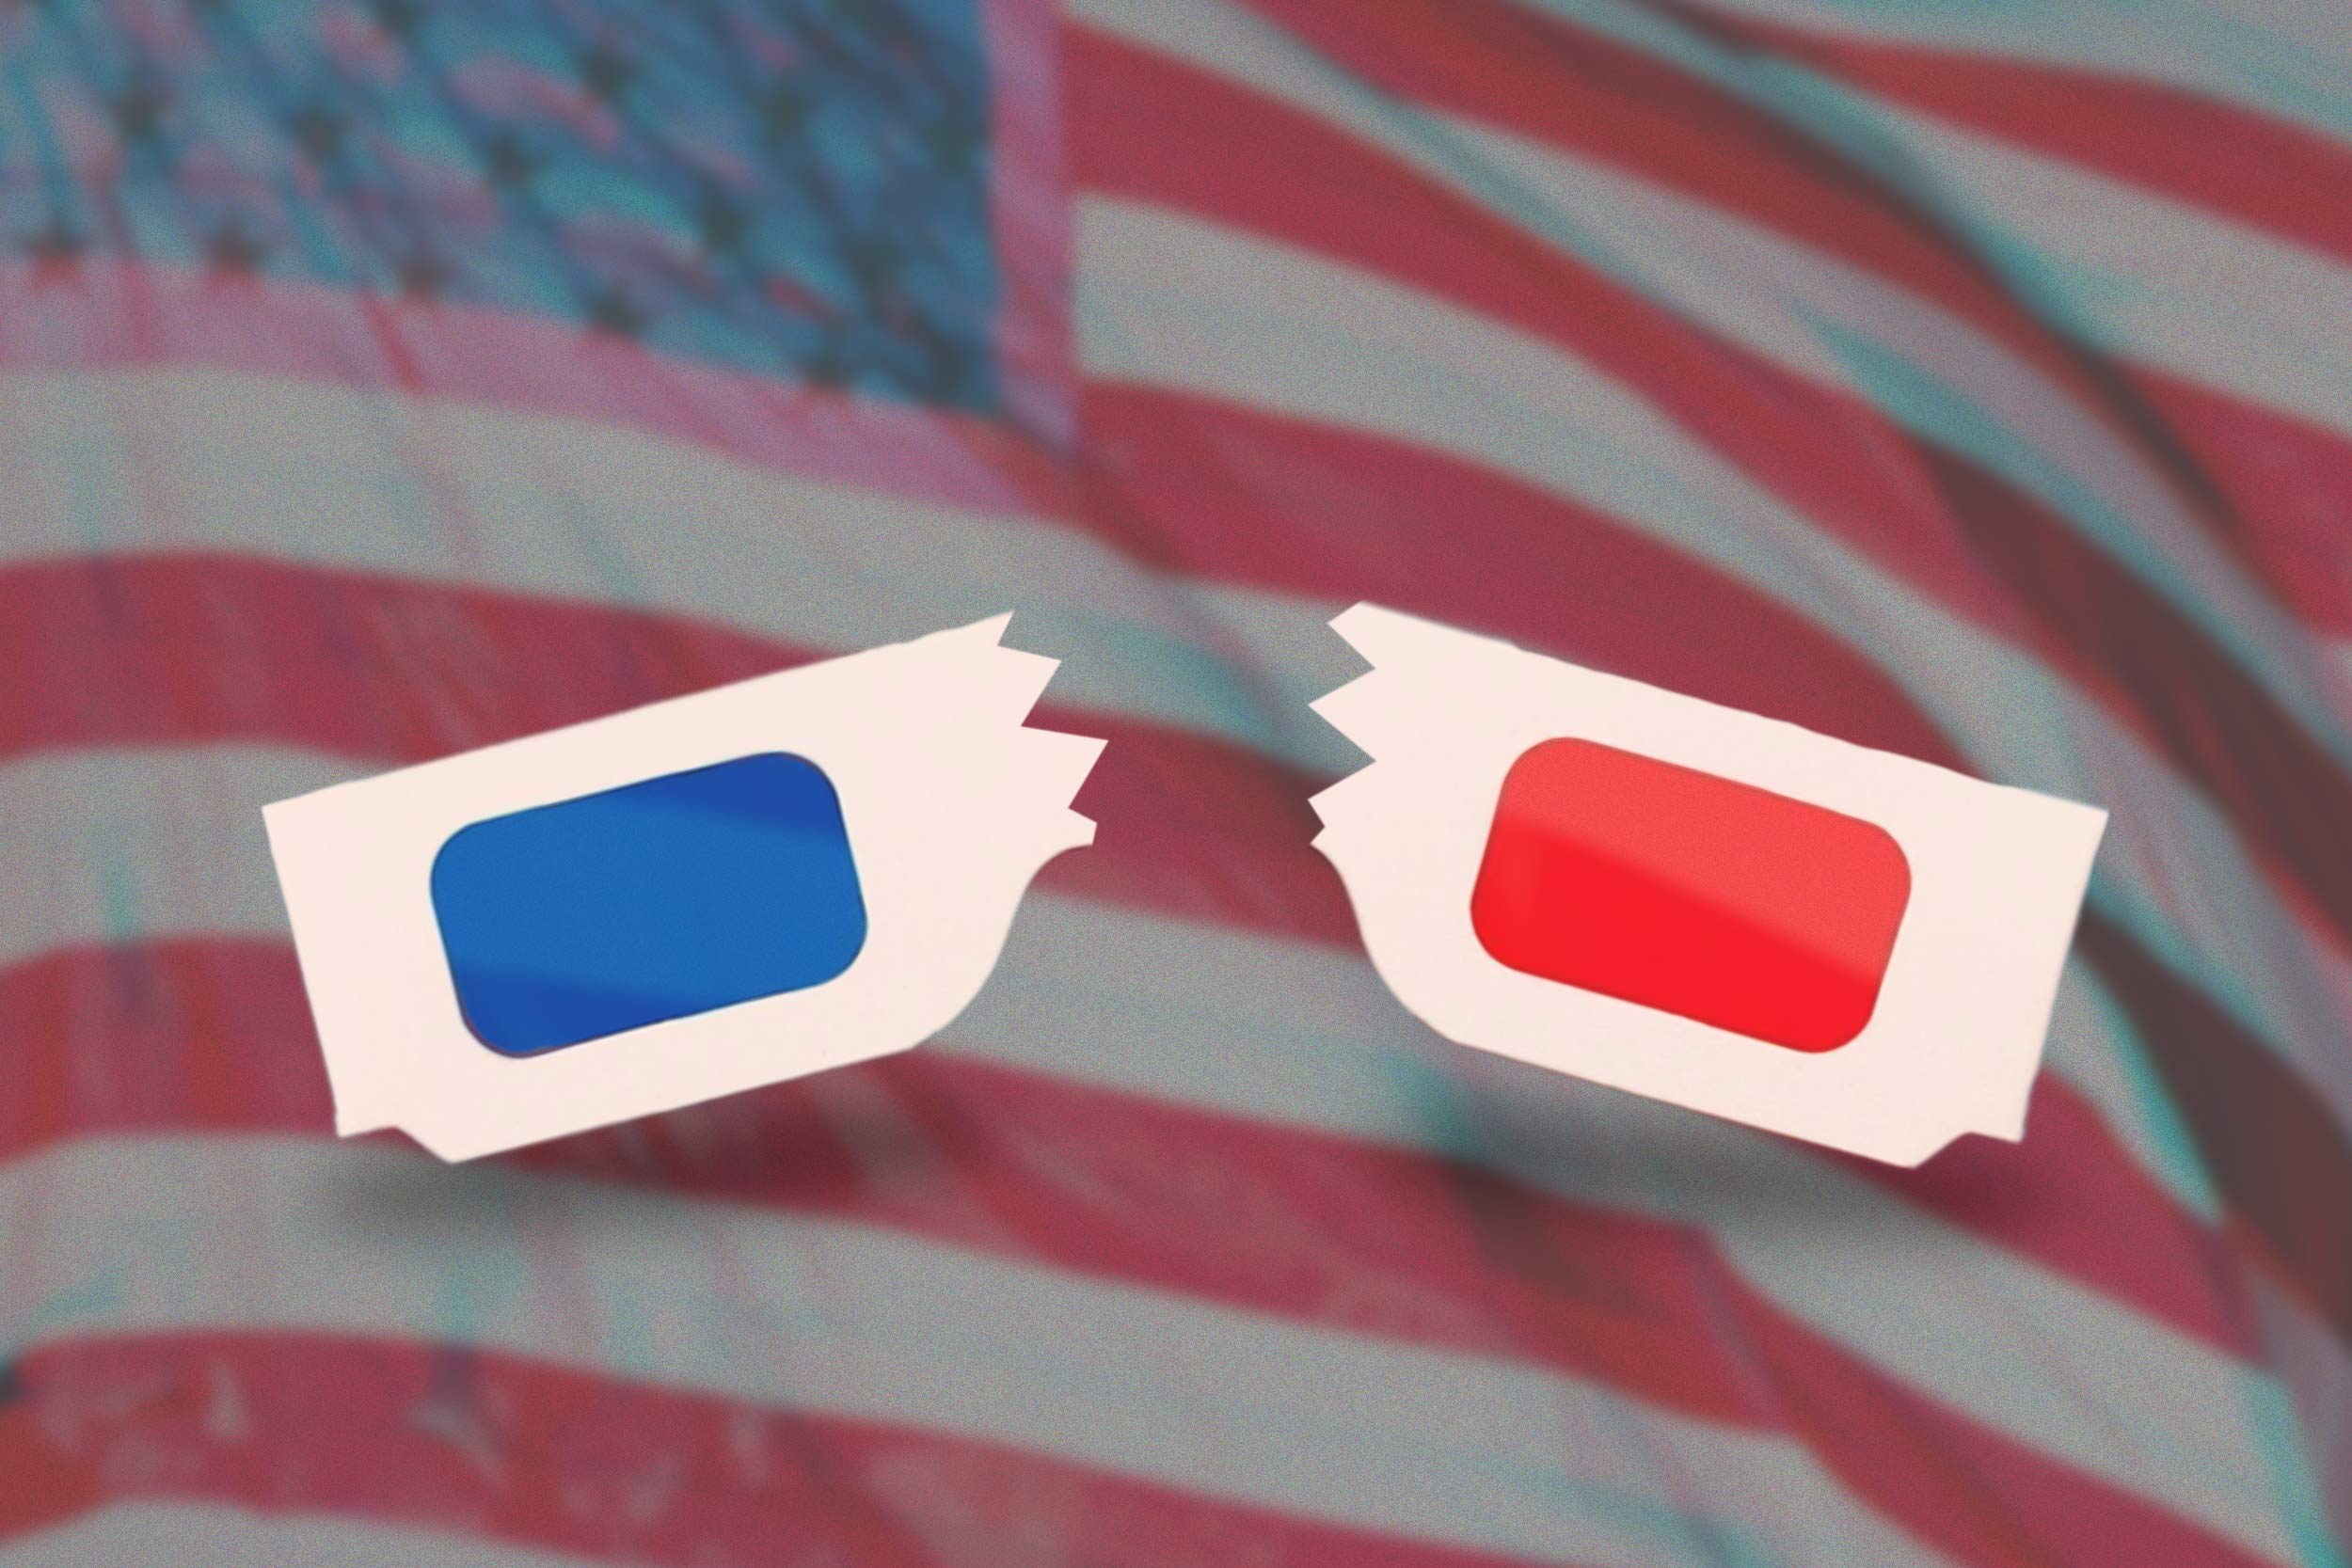 Illustration of classic blue and red 3D glasses broken in half over a 3D U.S. flag